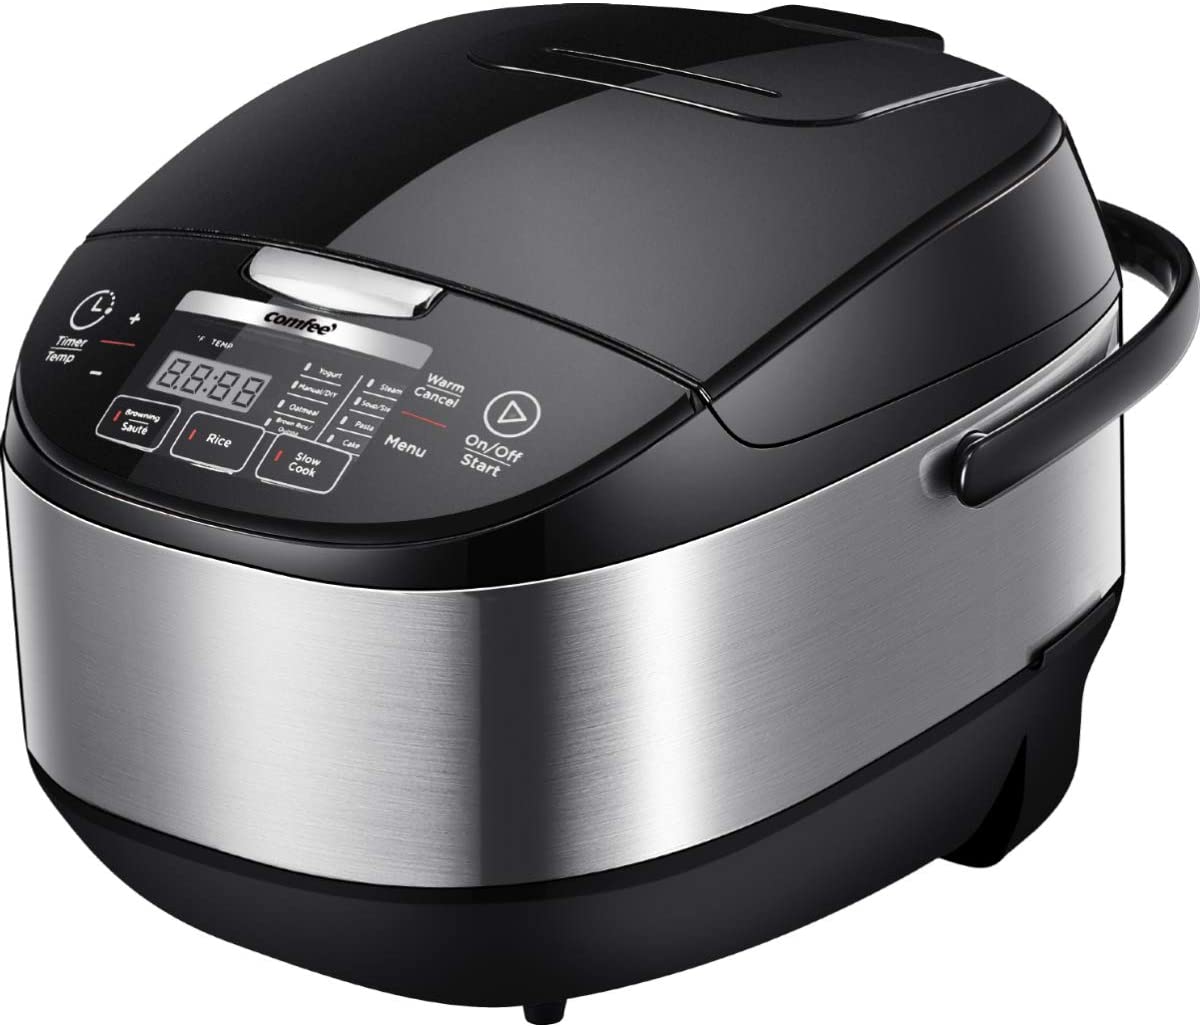 COMFEE' MB-FS5077 rice cooker 20 cups cooked Black